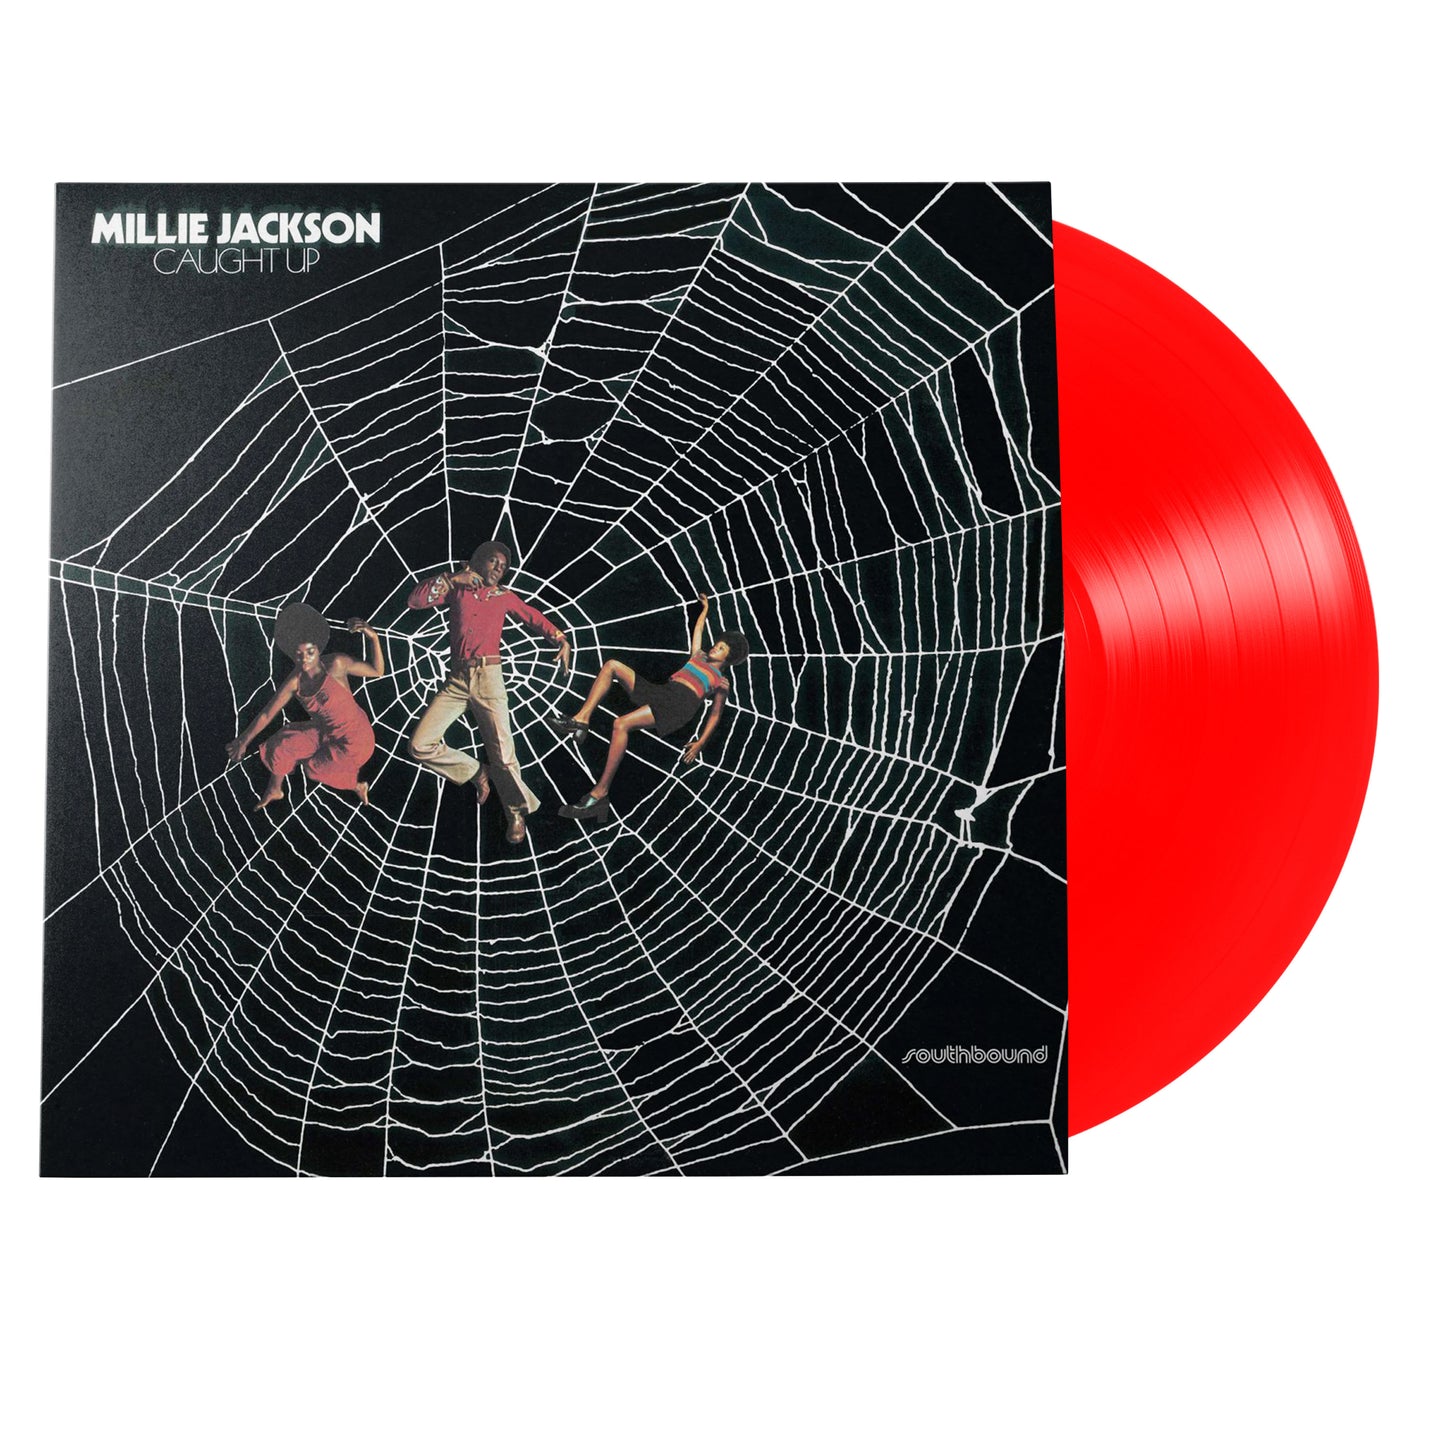 Caught Up (Exclusive | Limited Edition | Red Vinyl)